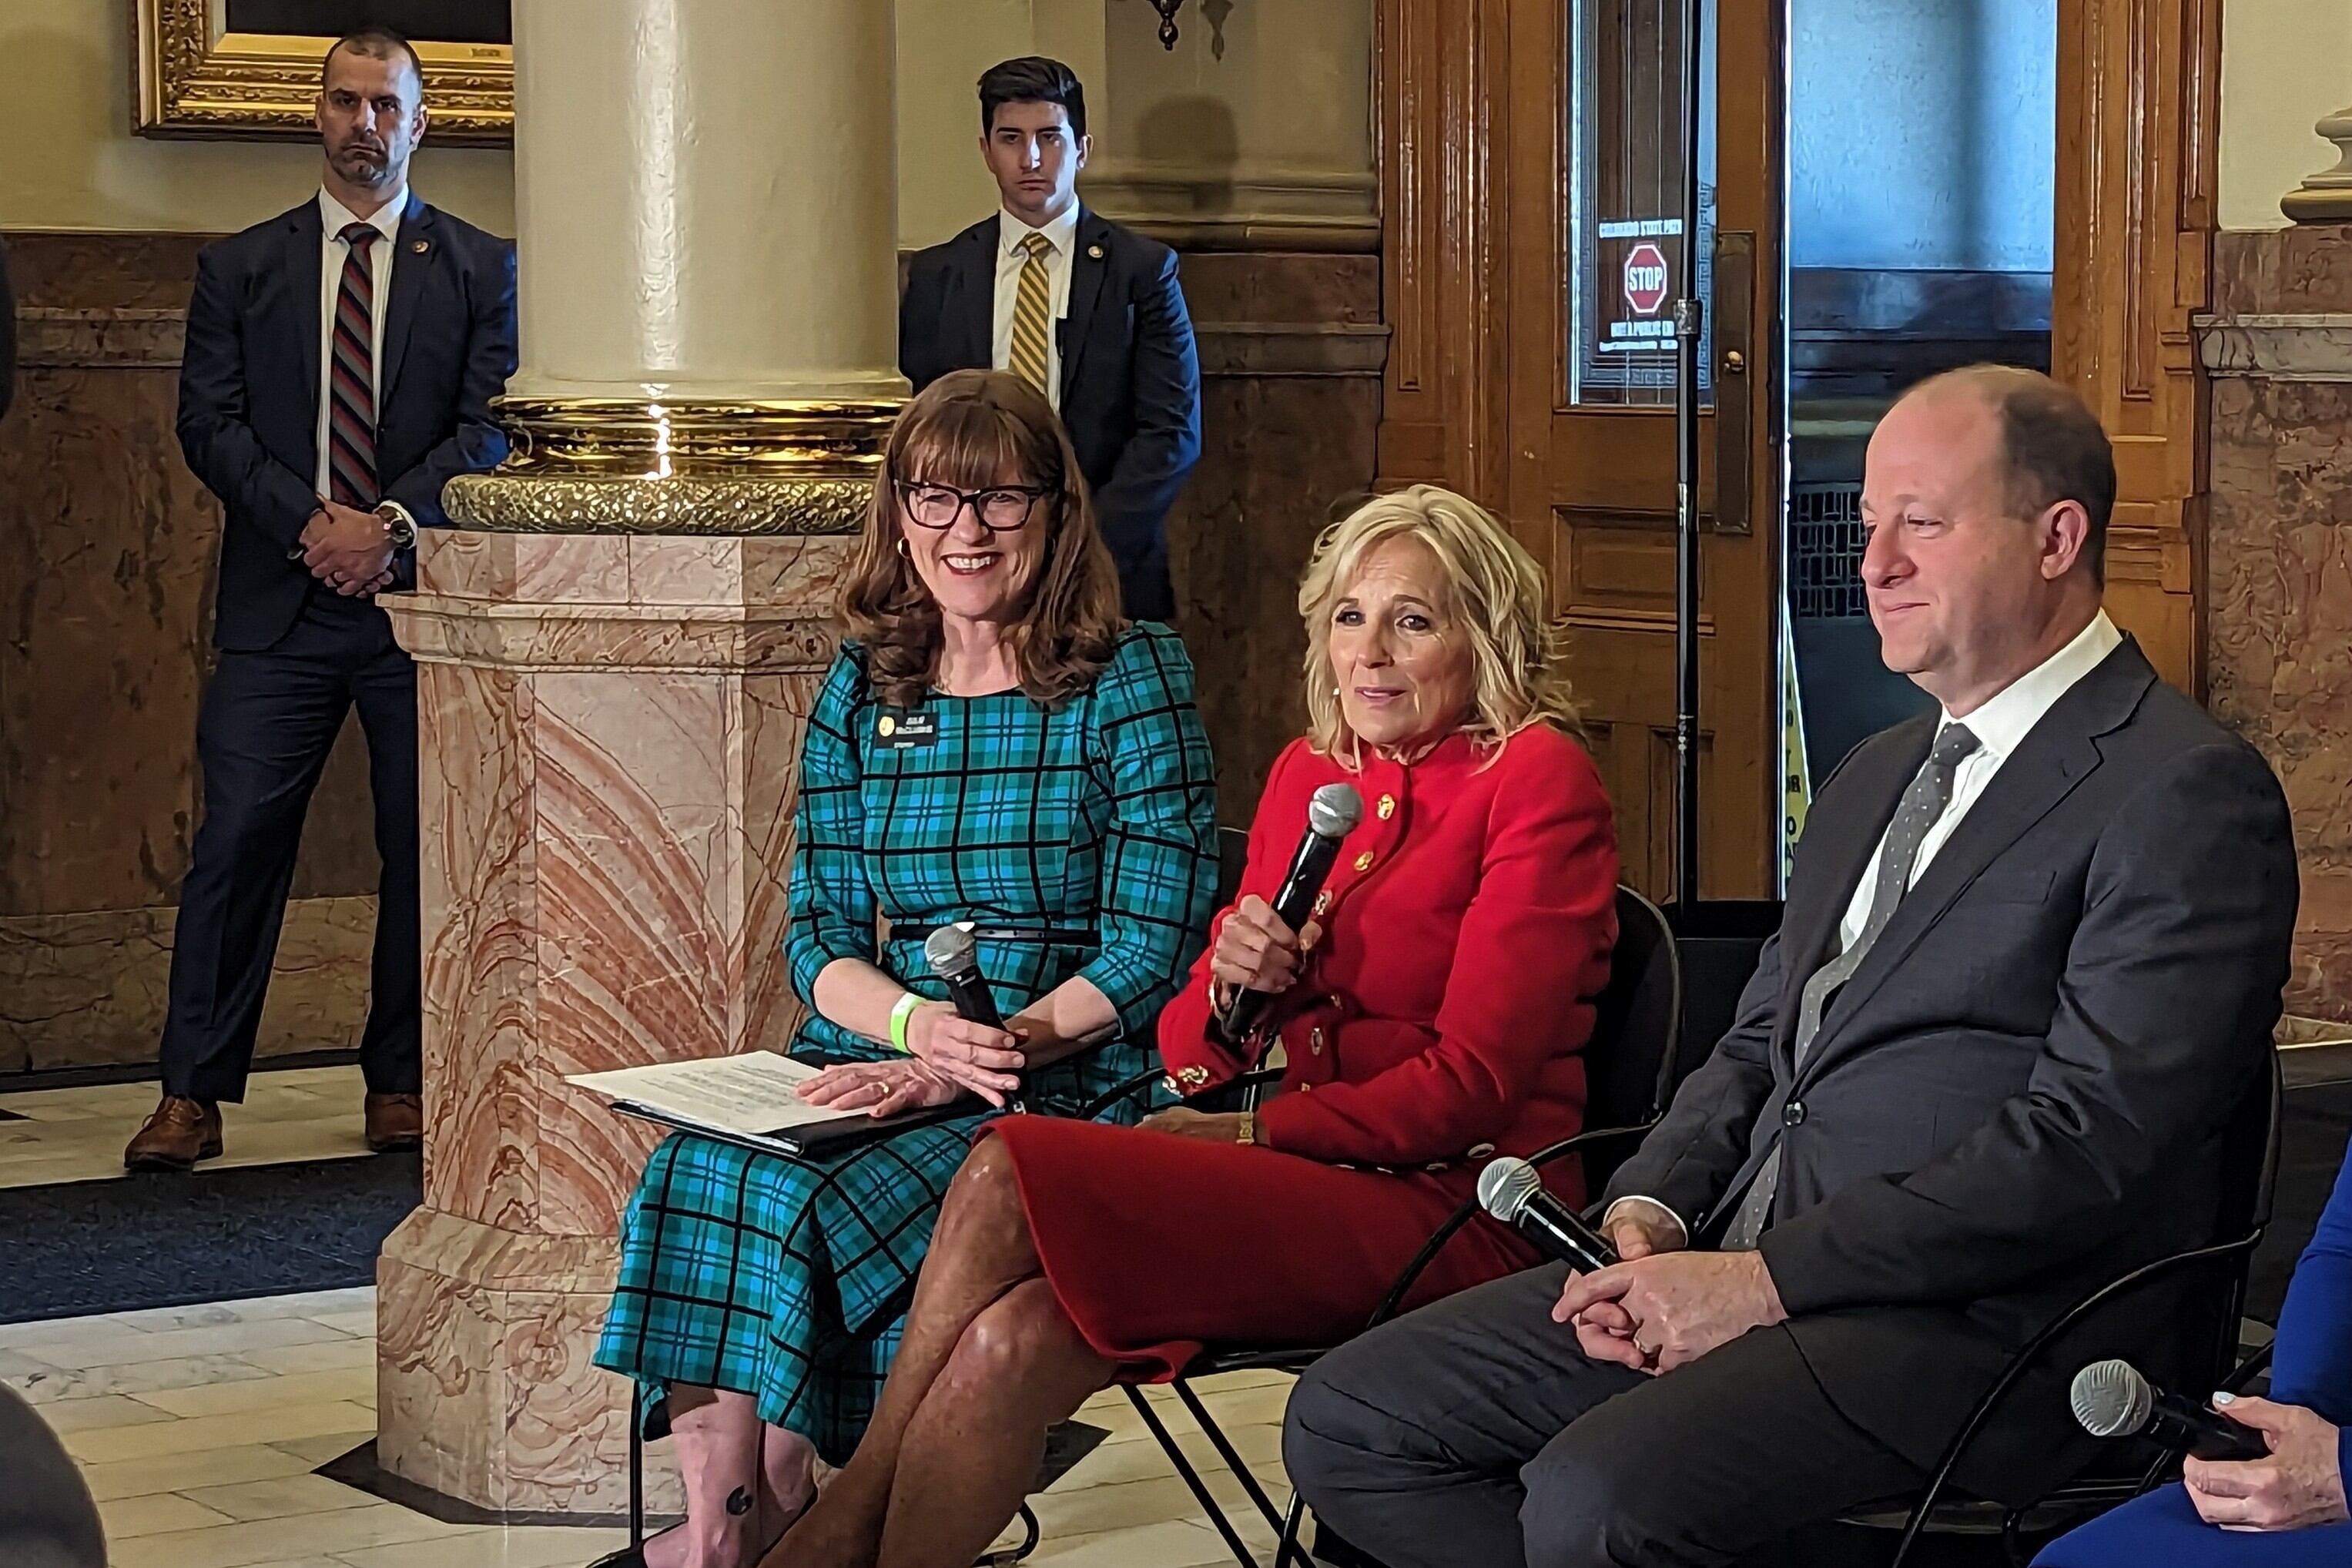 First lady Jill Biden dressed in red sits with Colorado’s House speaker dressed in teal and Gov. Jared Polis.